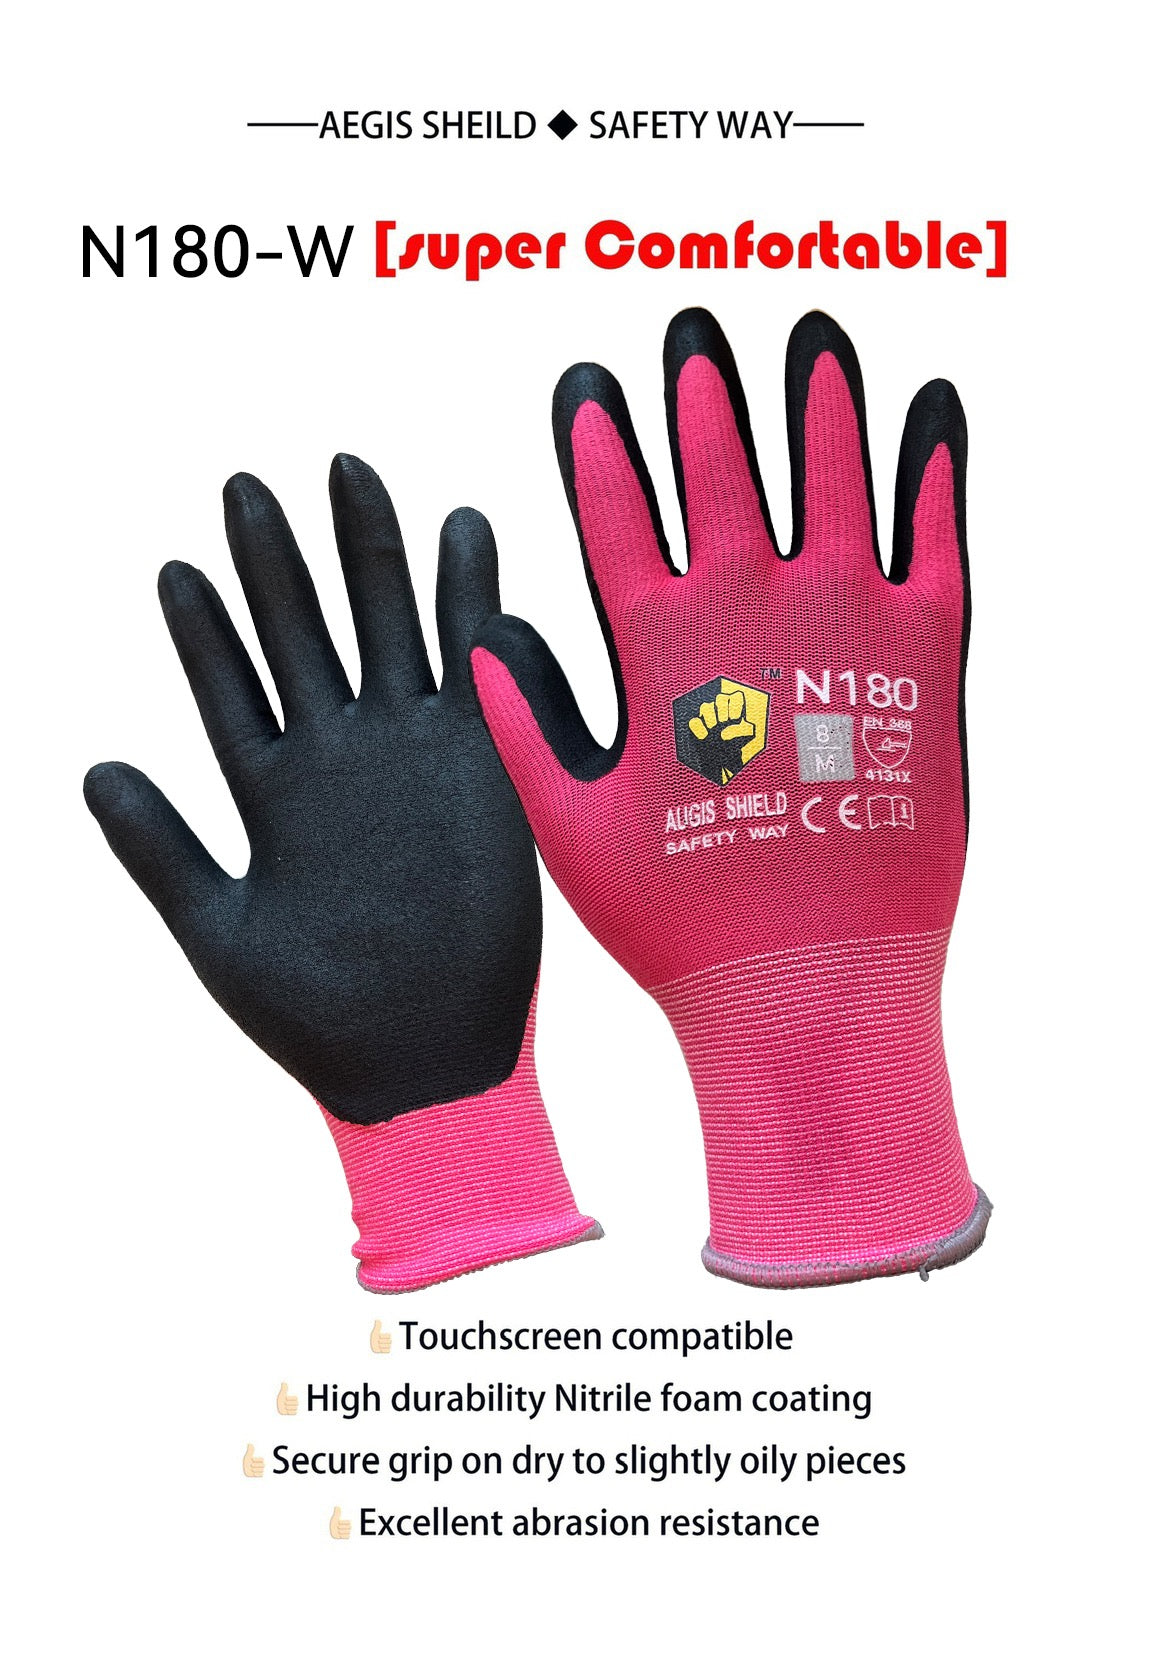 N-180W Micro-foam Nitrile Coated Work Gloves specifically designed for women in industry